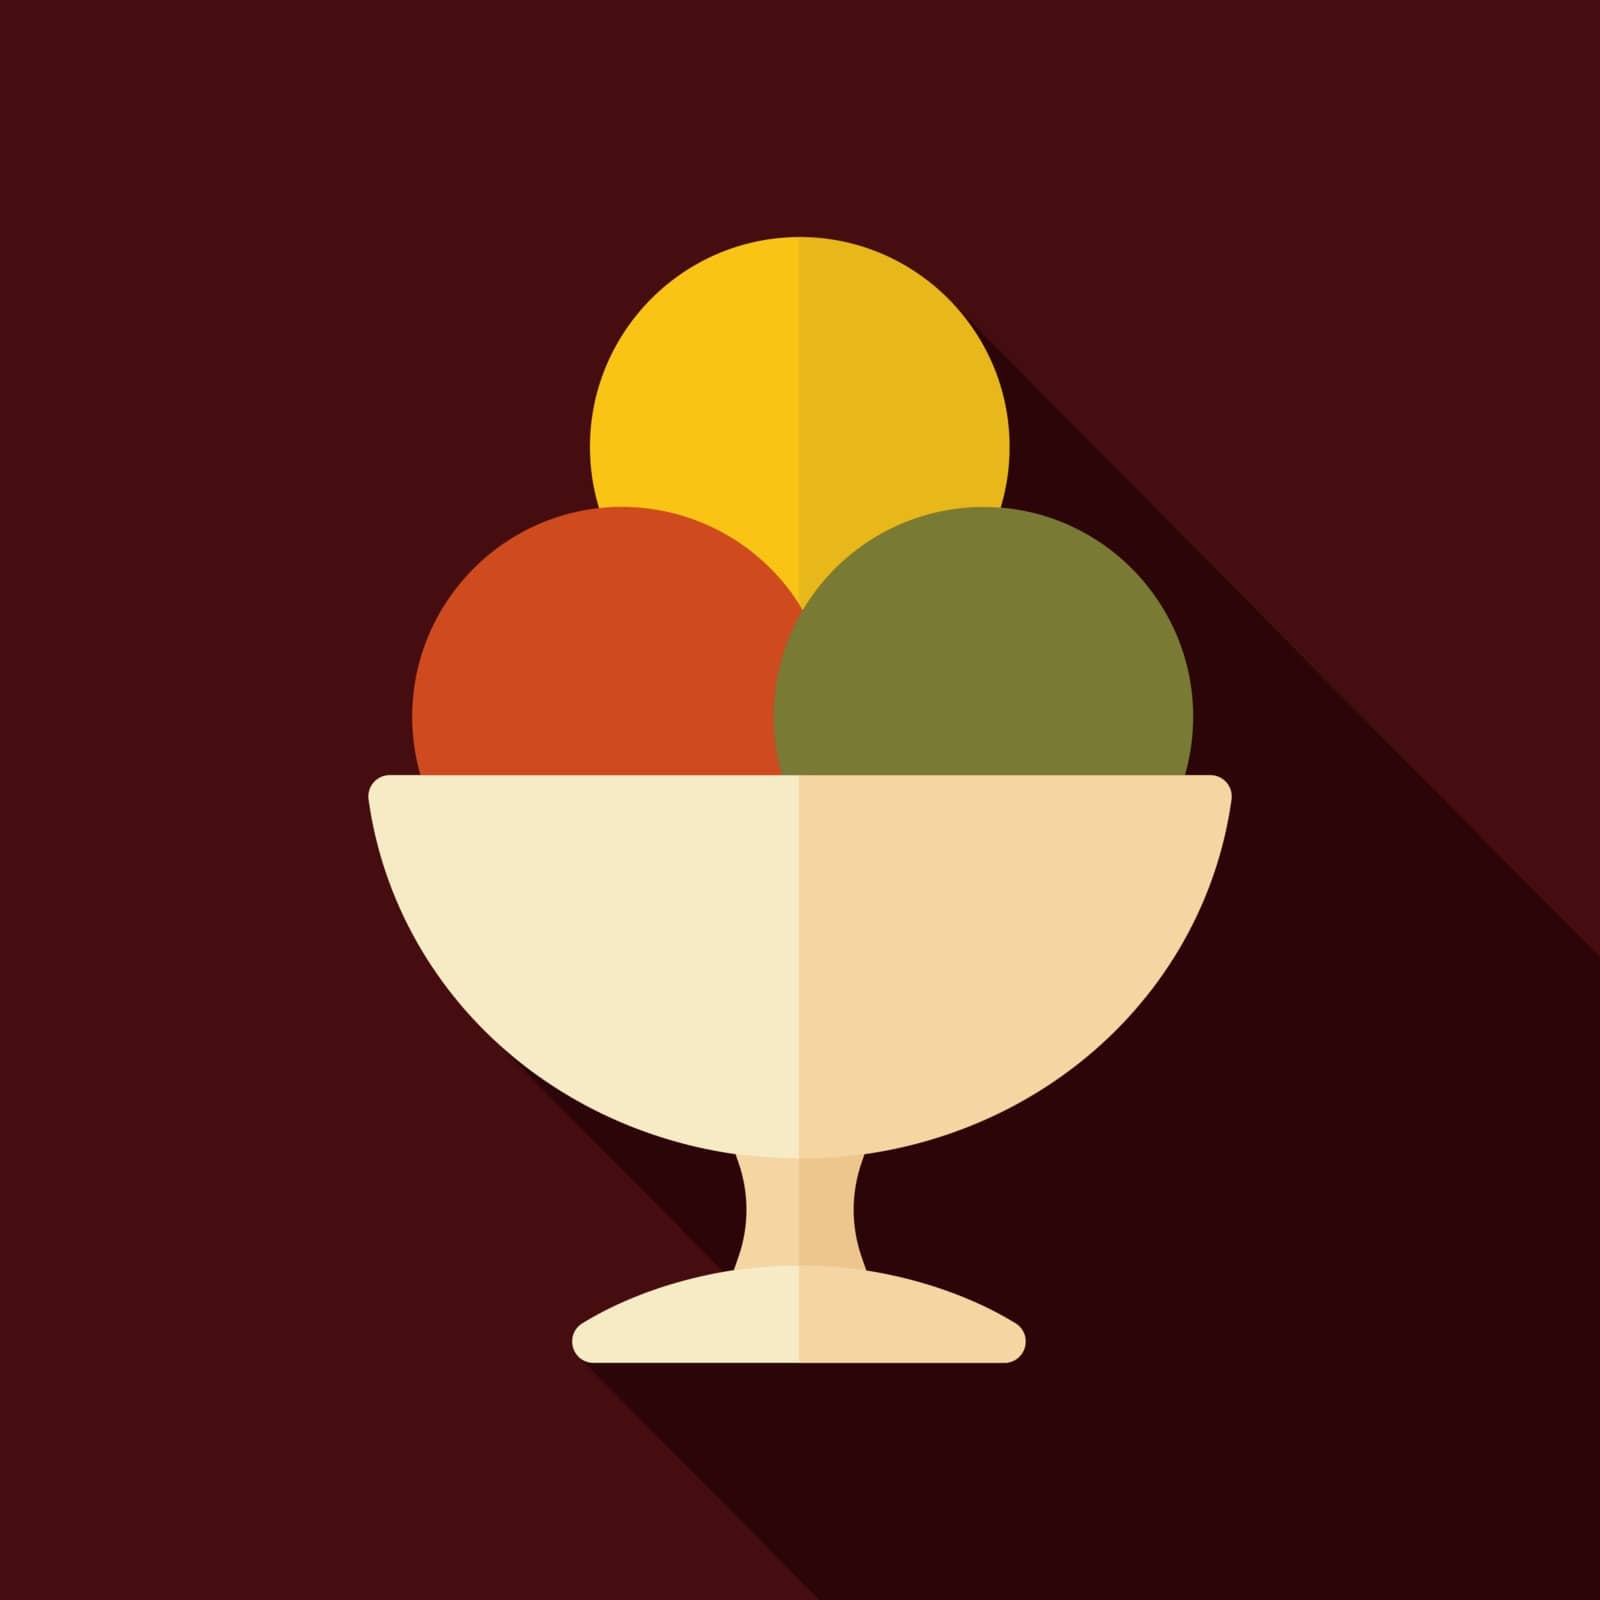 Ice-cream balls in bowl vector icon. Fastfood sign by nosik